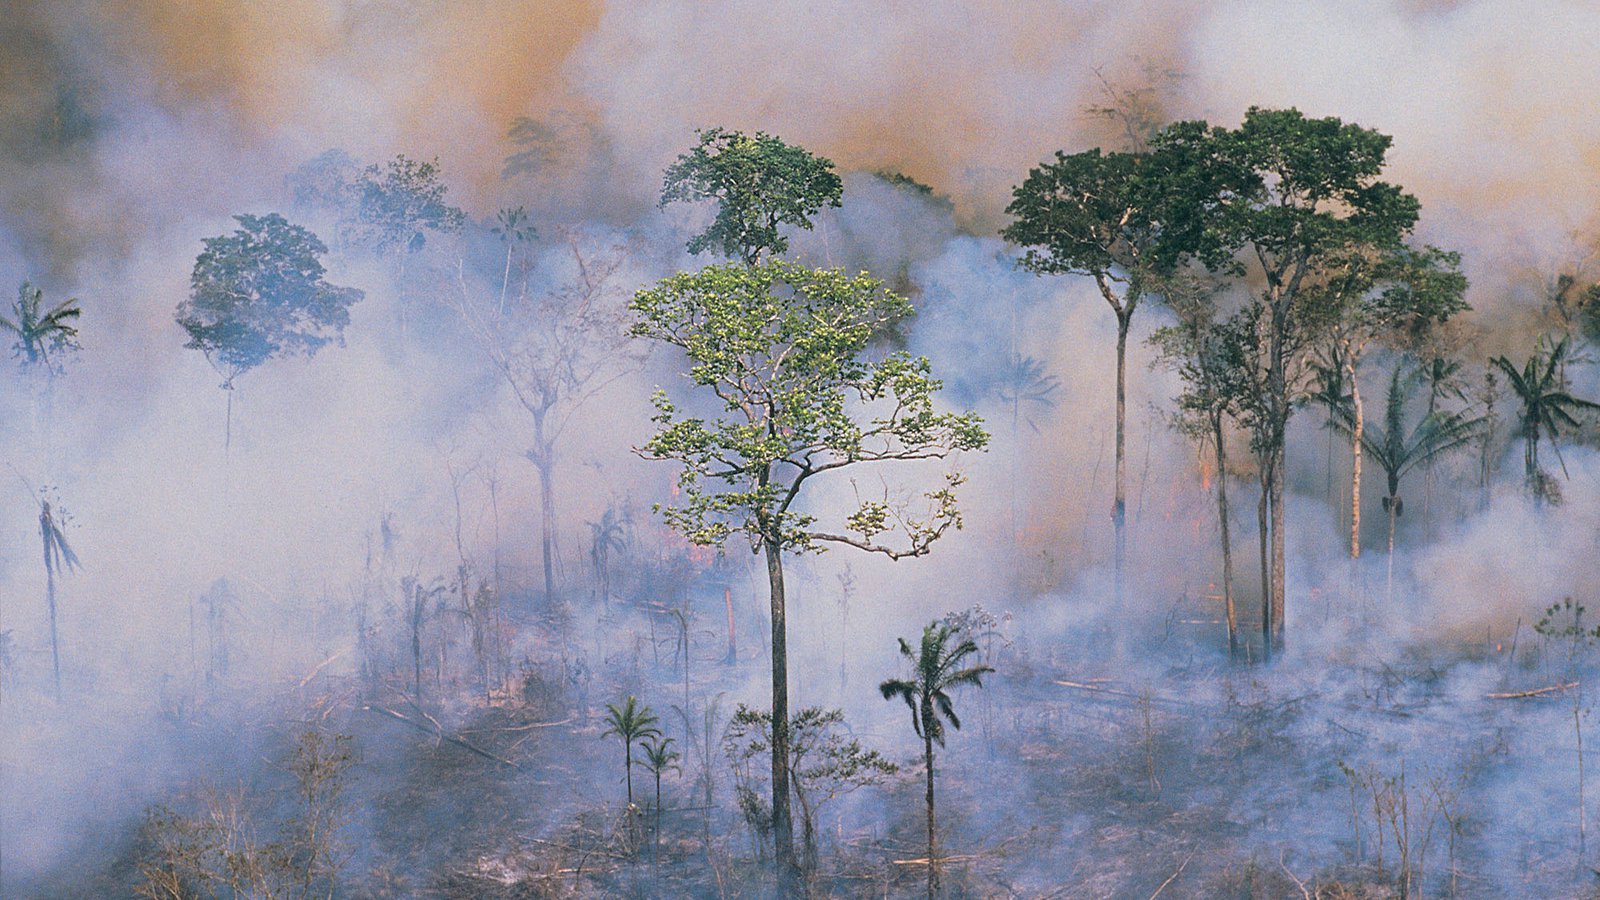 Amazon forest fires. Copyright: Getty images